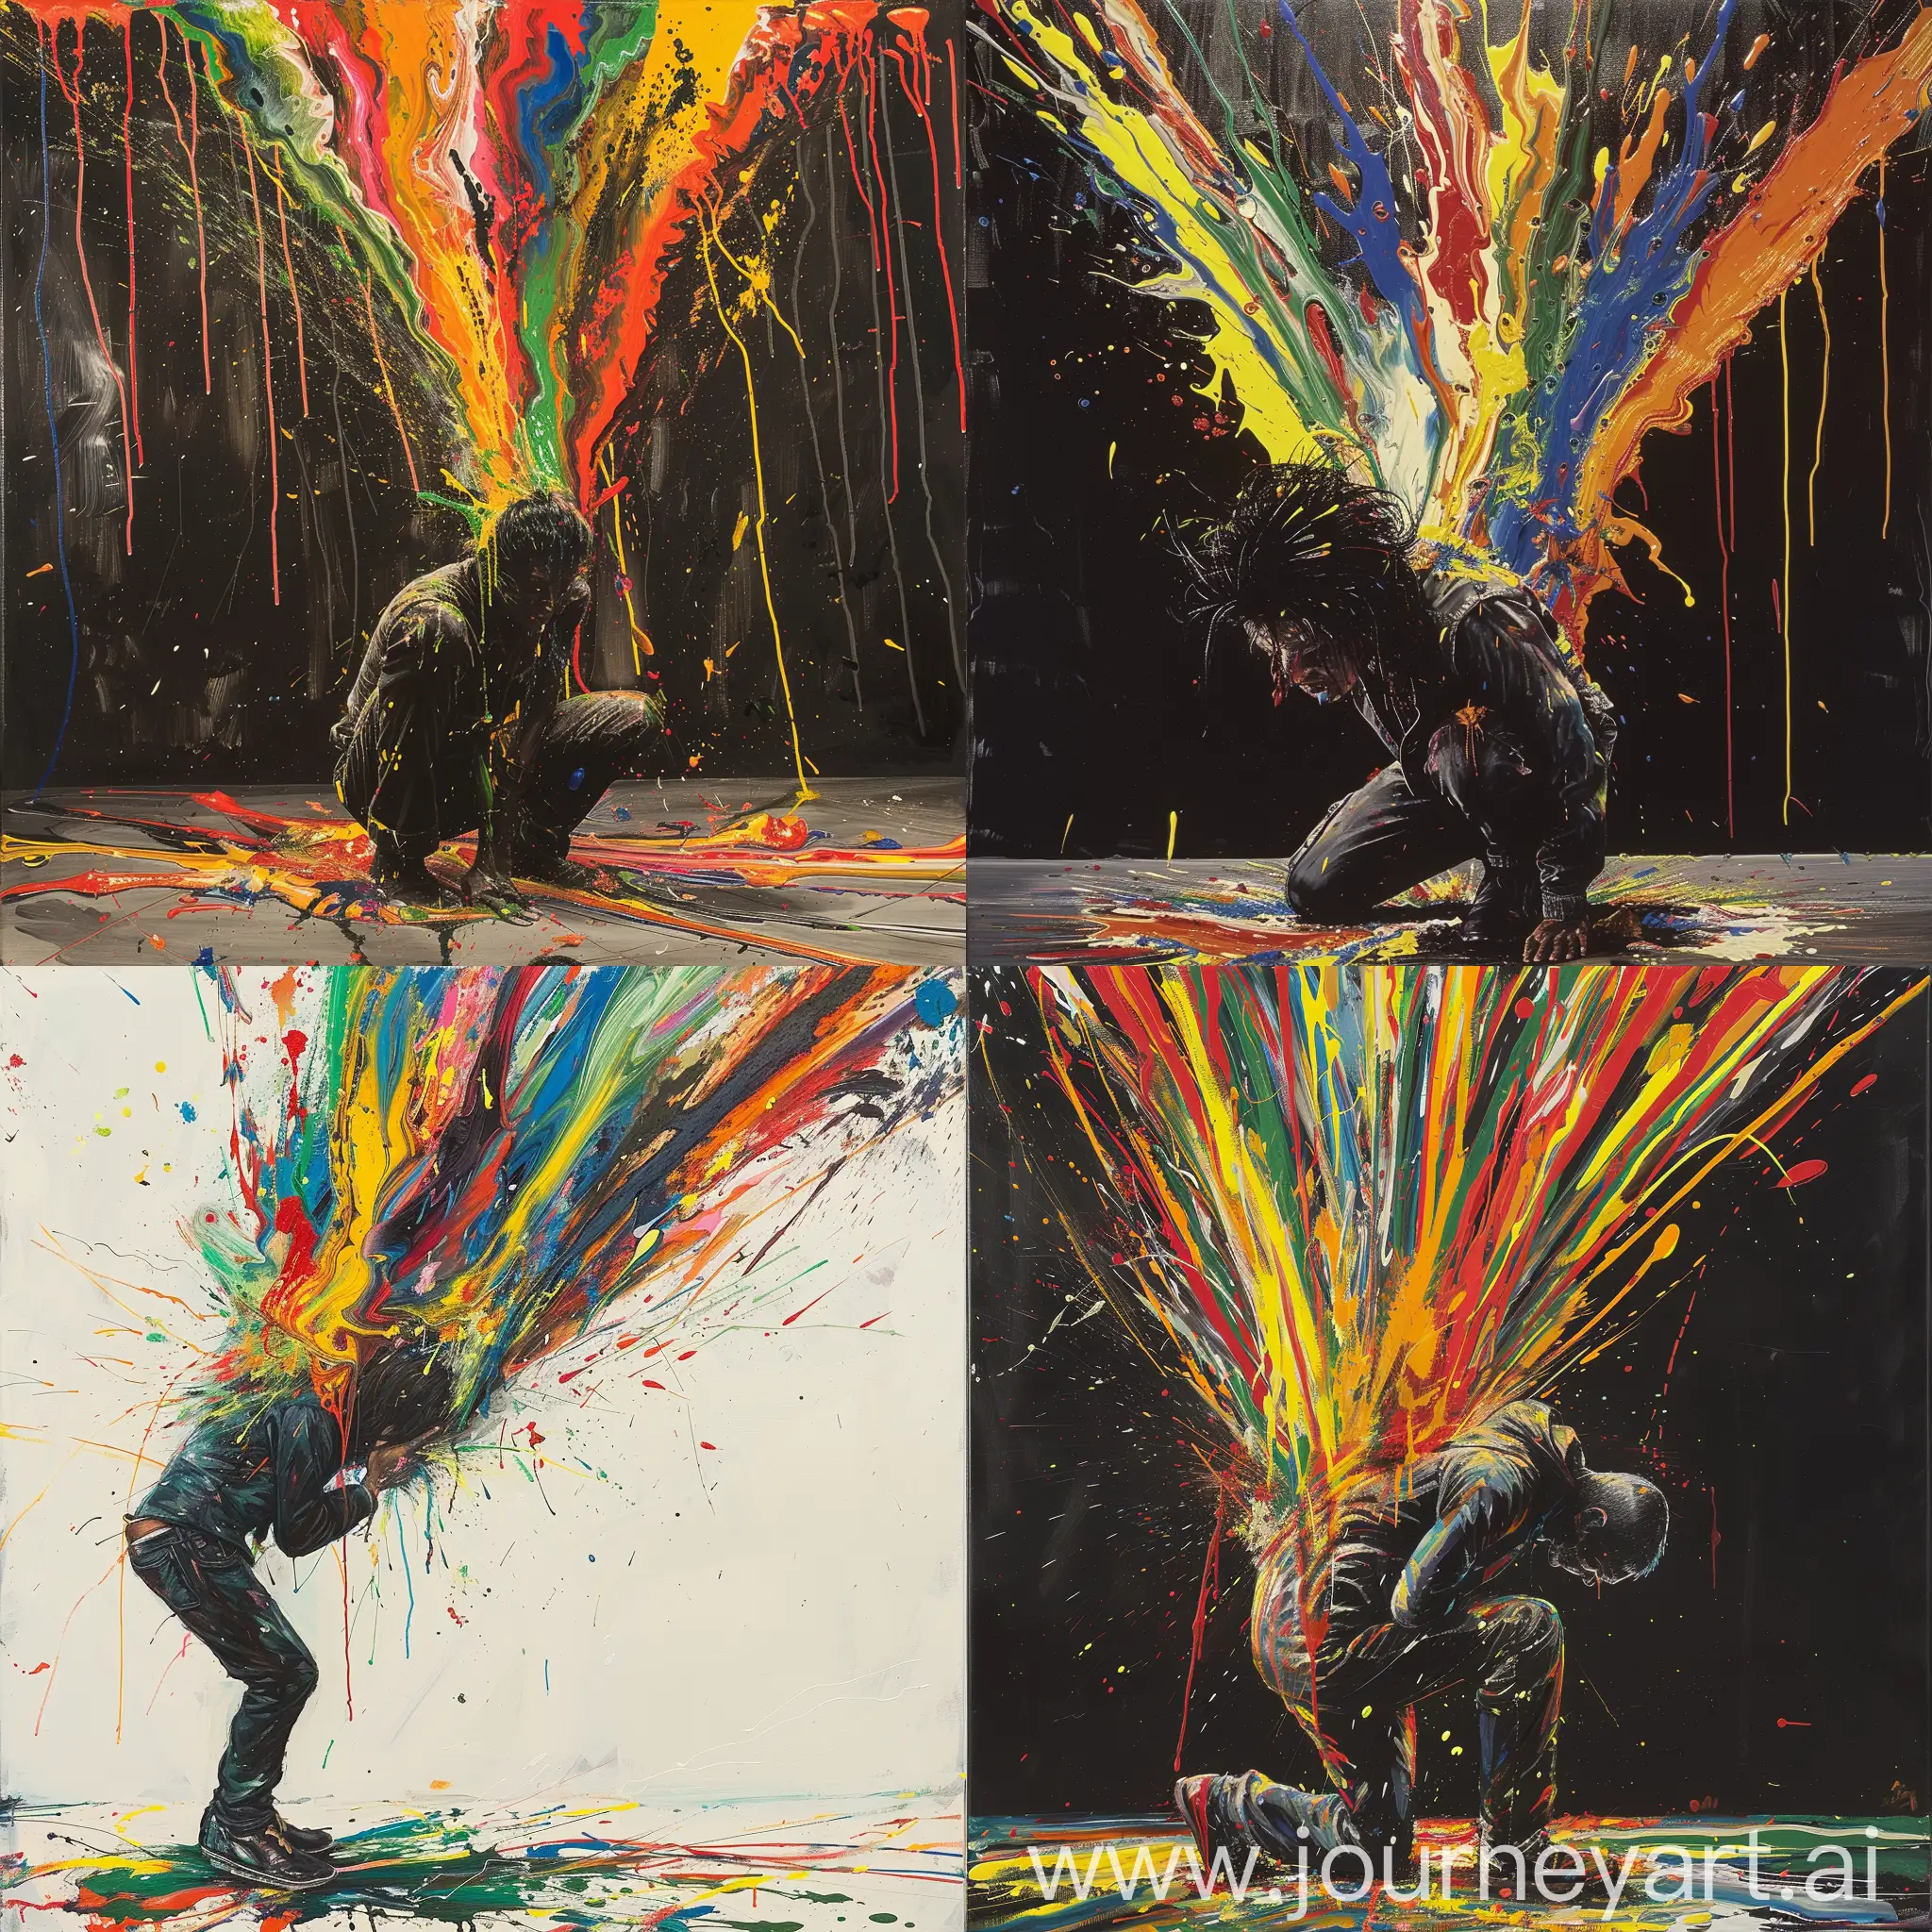 
In this provocative painting, the canvas becomes both a stage and a receptacle for the chaotic expression of the artist's inner turmoil. At the center of the composition, an artist hunches over, convulsing with intensity as vibrant streaks of paint erupt from their mouth, splattering across the awaiting canvas below.